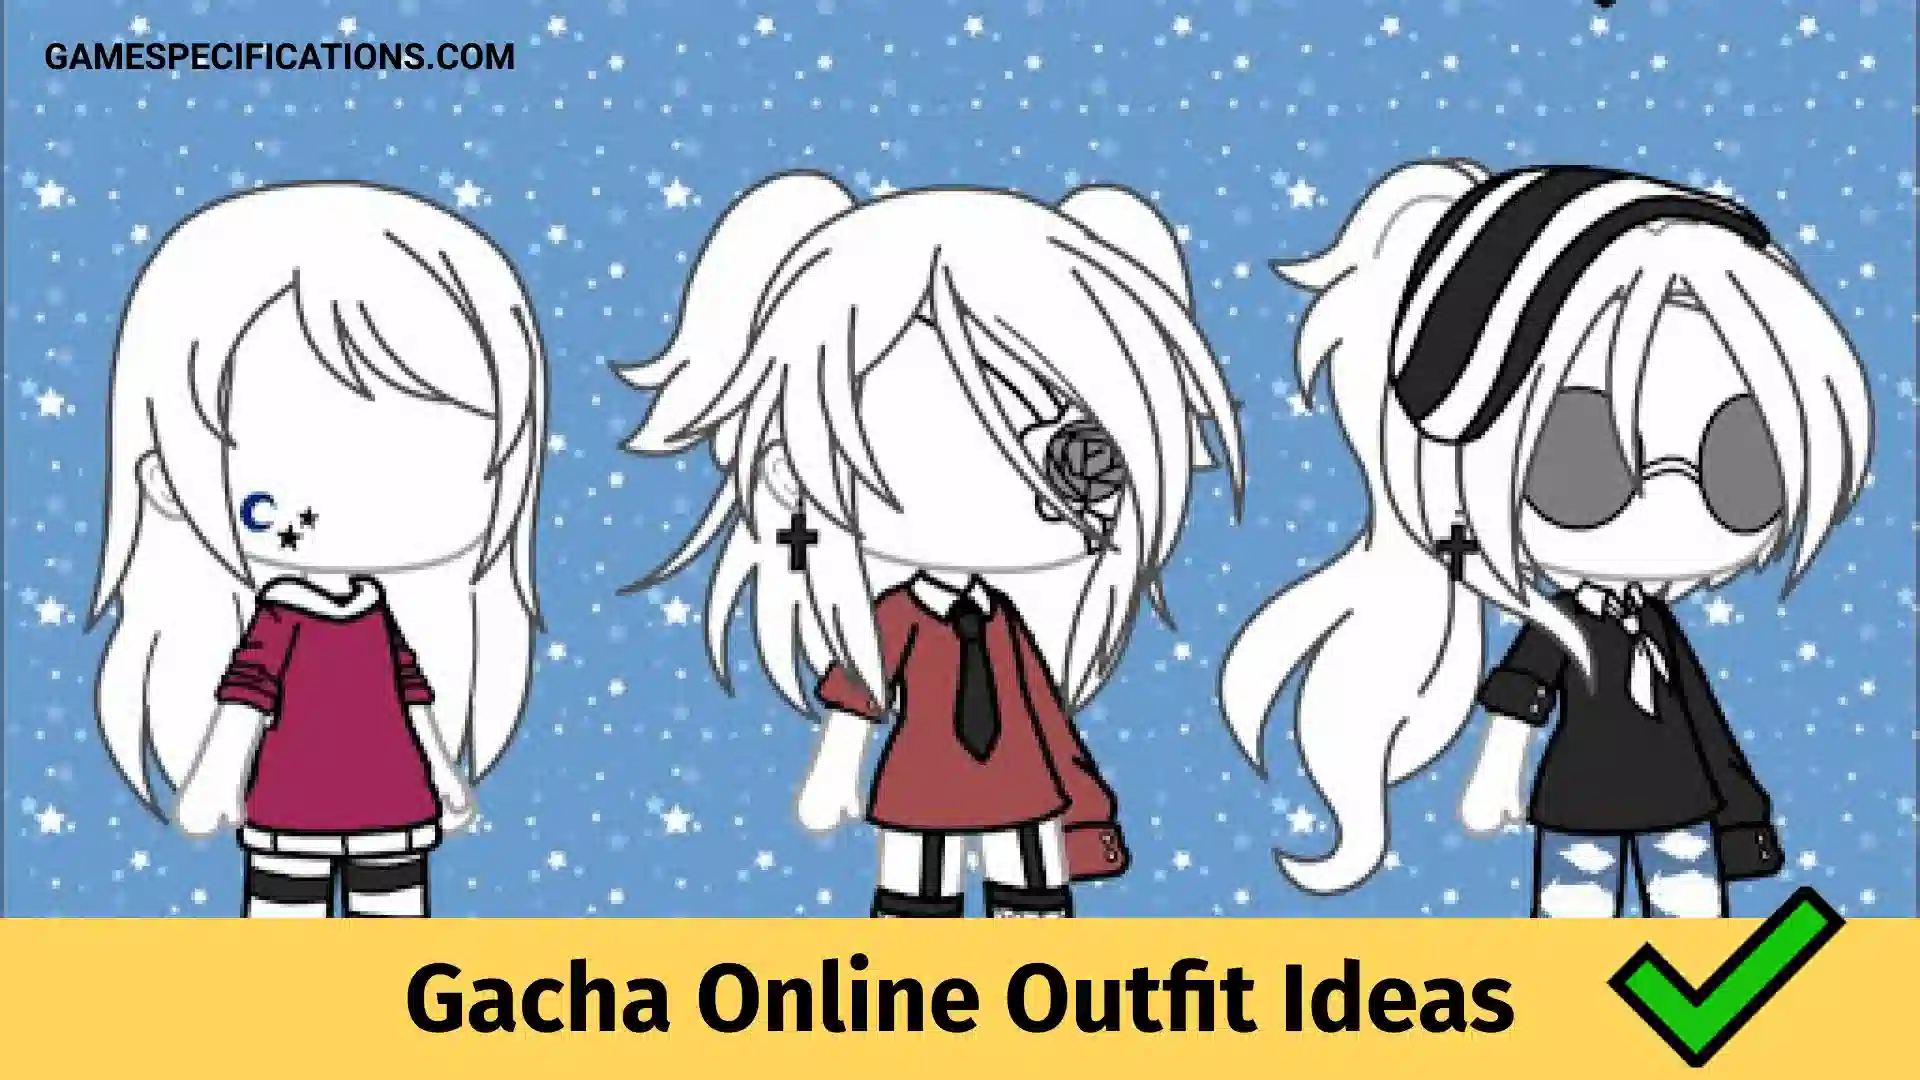 10 Awesome Gacha Online Outfit Ideas 22 Game Specifications